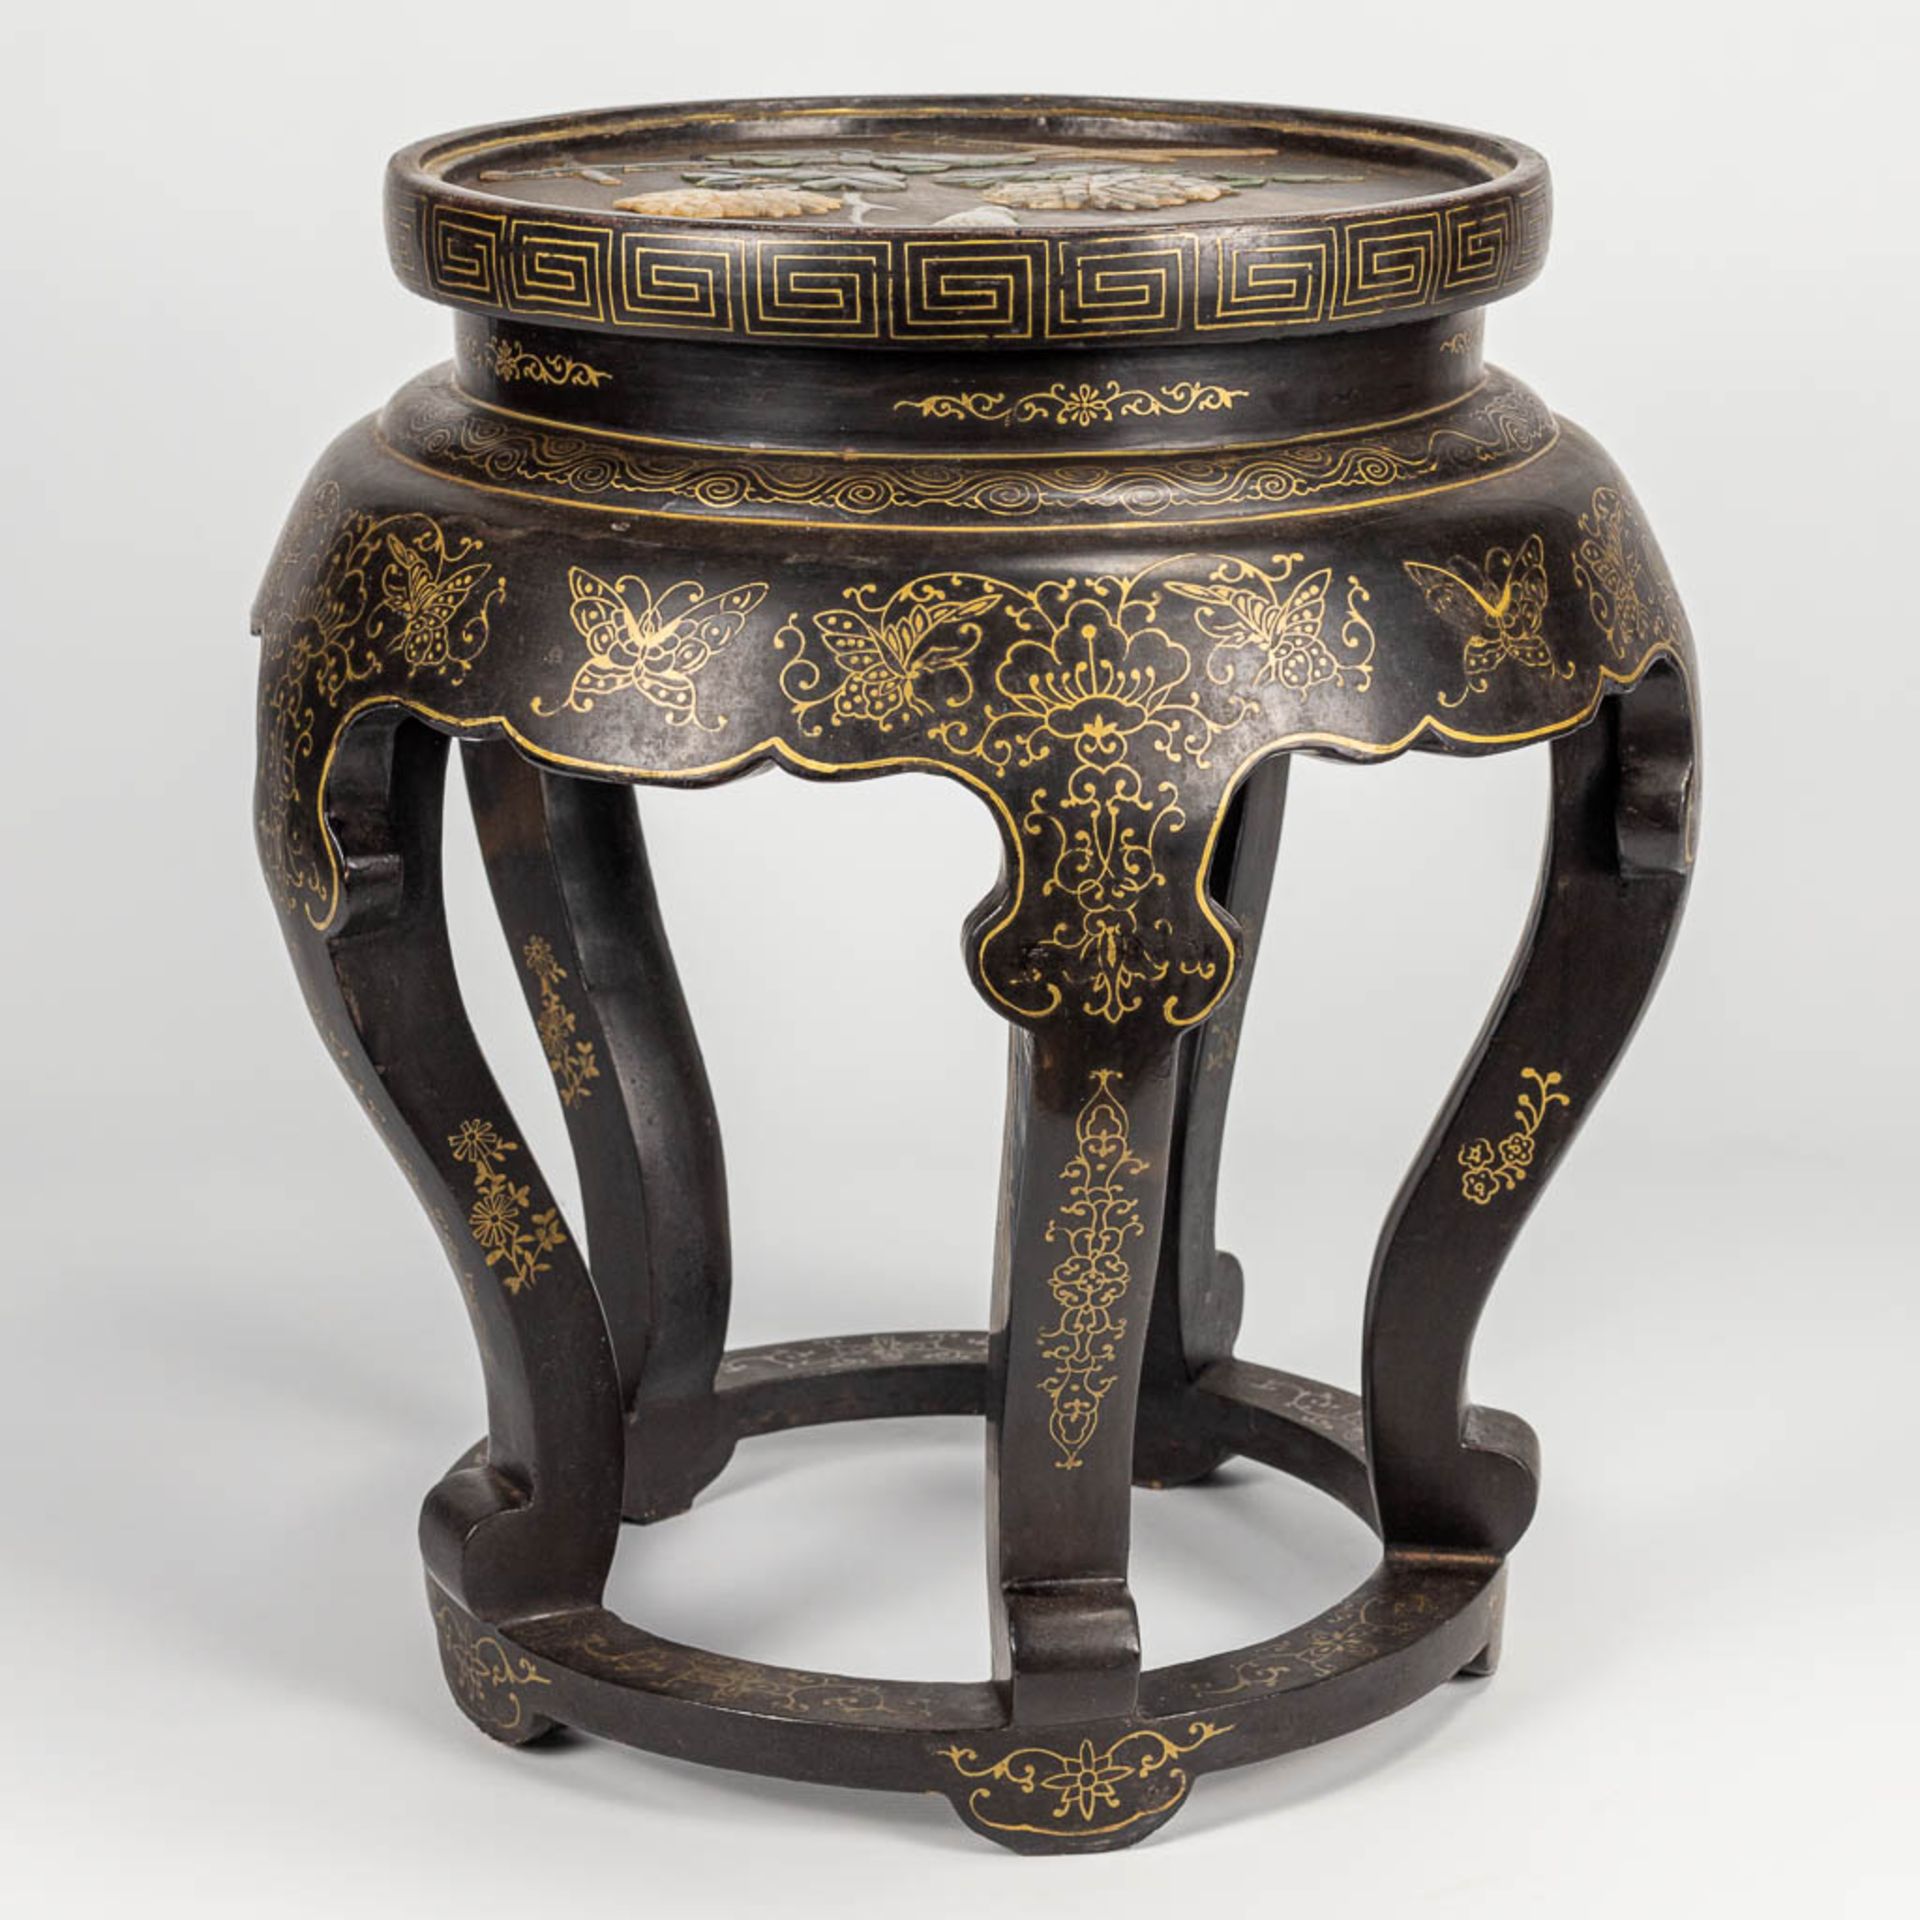 A side table made of hardwood and inlaid with Chinese hardstone - Image 4 of 10